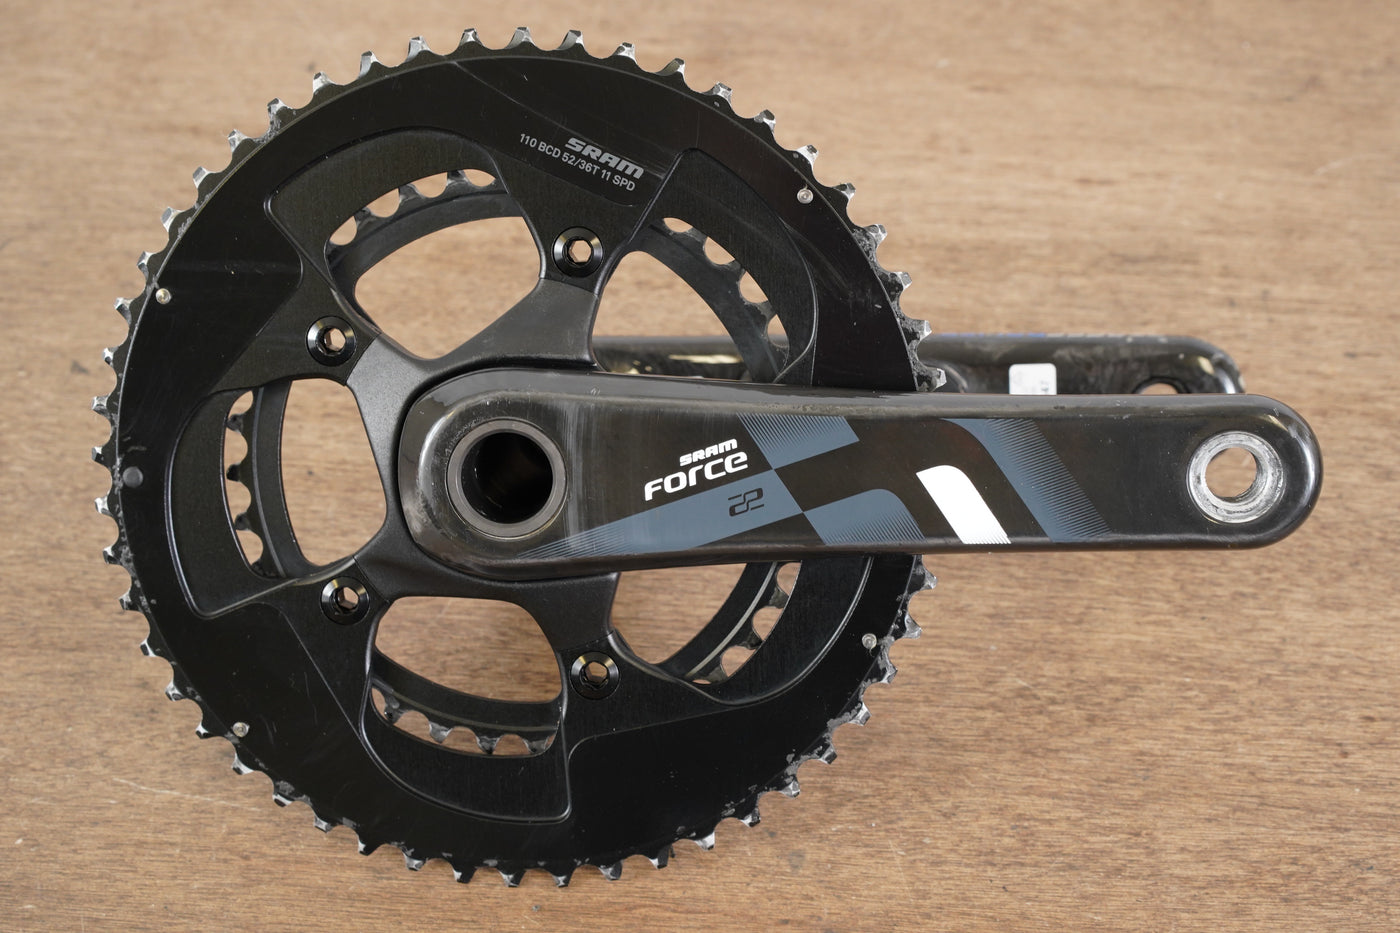 170mm 52/36T GXP SRAM Force Stages 11 Speed Power Meter Crankset